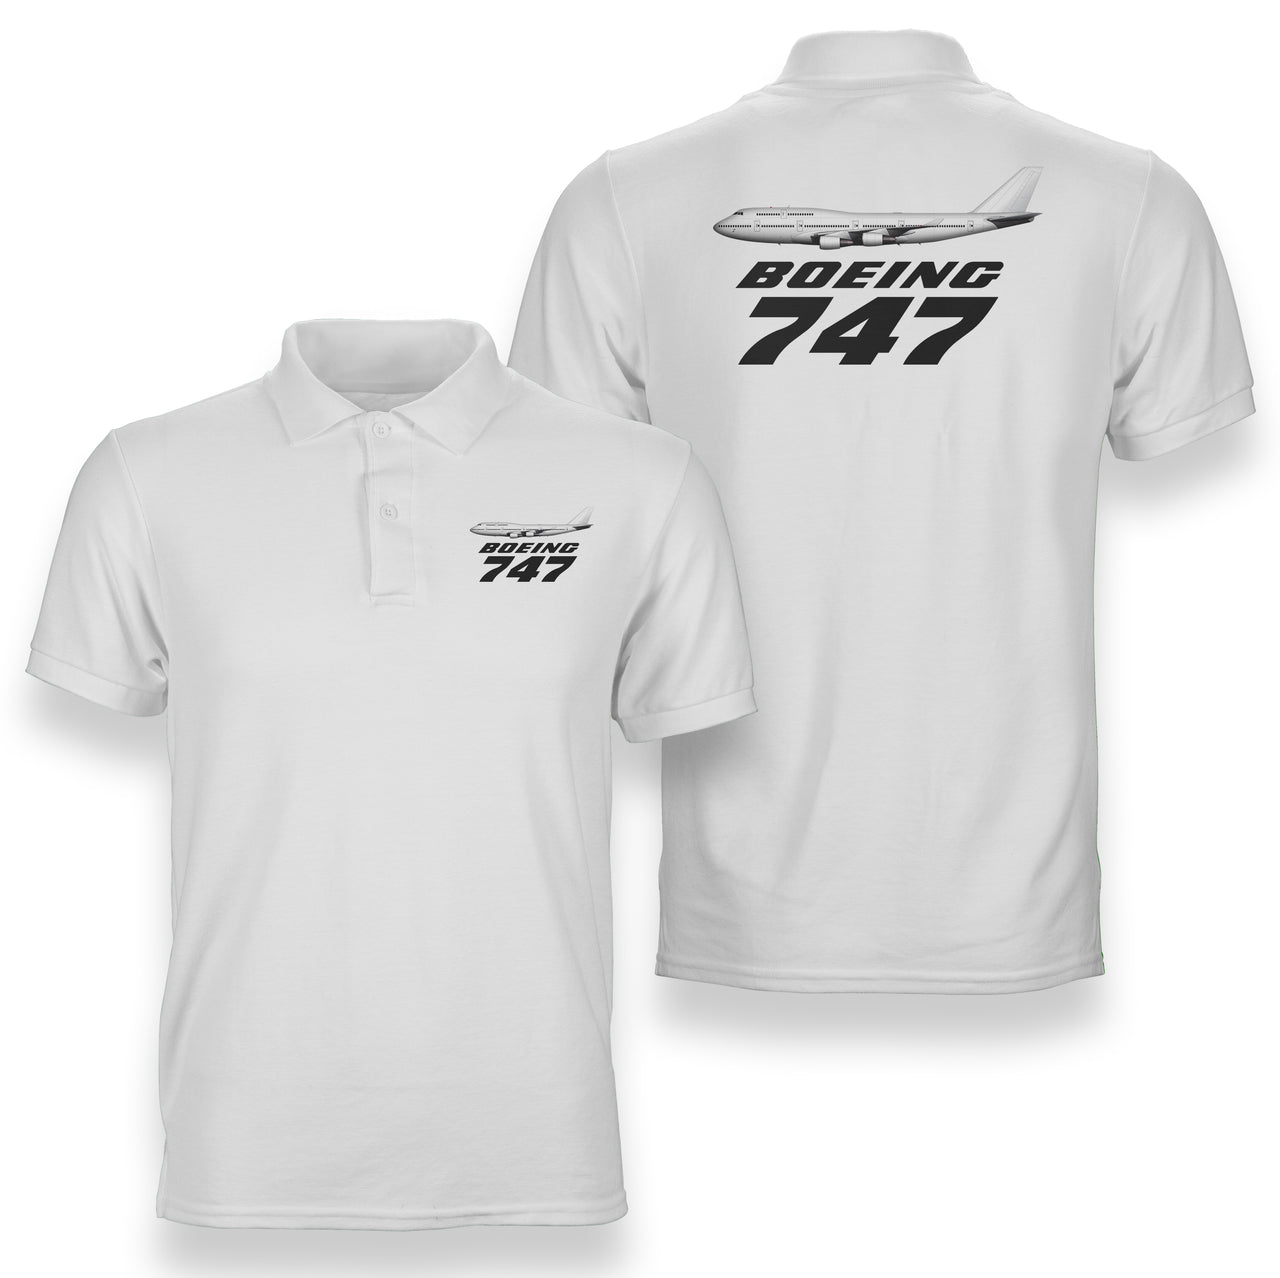 The Boeing 747 Designed Double Side Polo T-Shirts